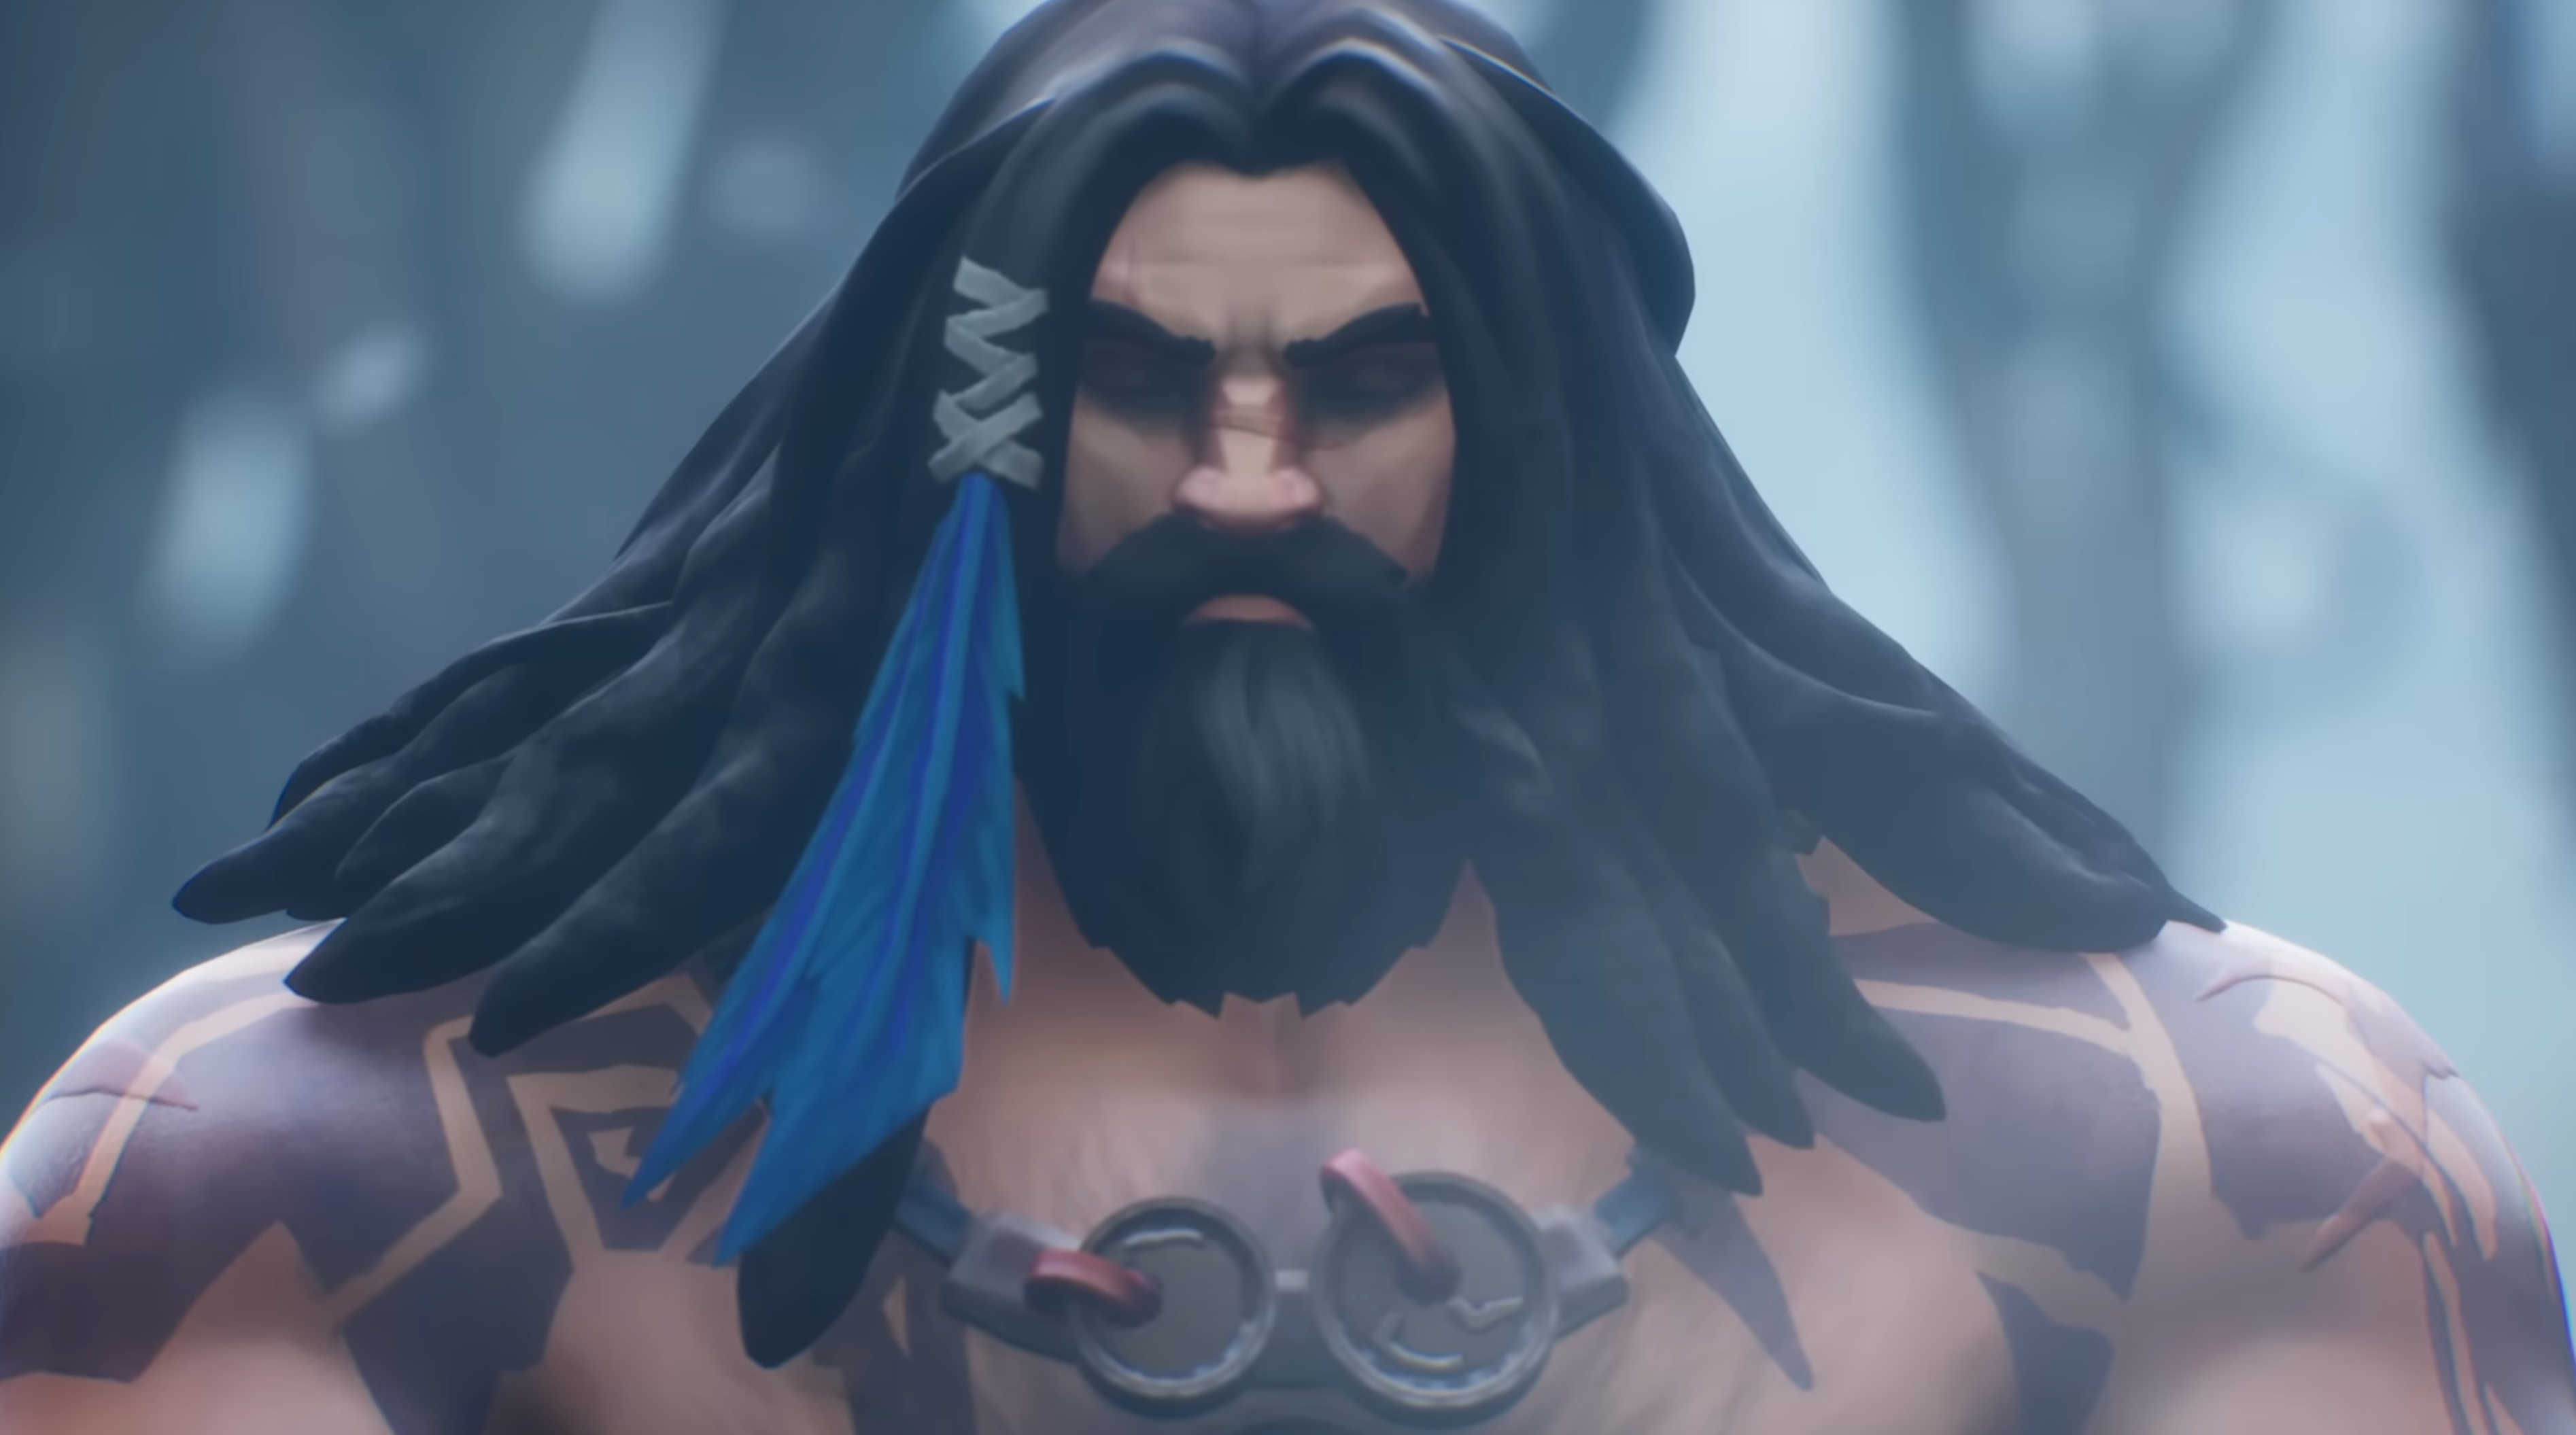 Final result of Udyr VGU unveiled in Riot’s latest League trailer